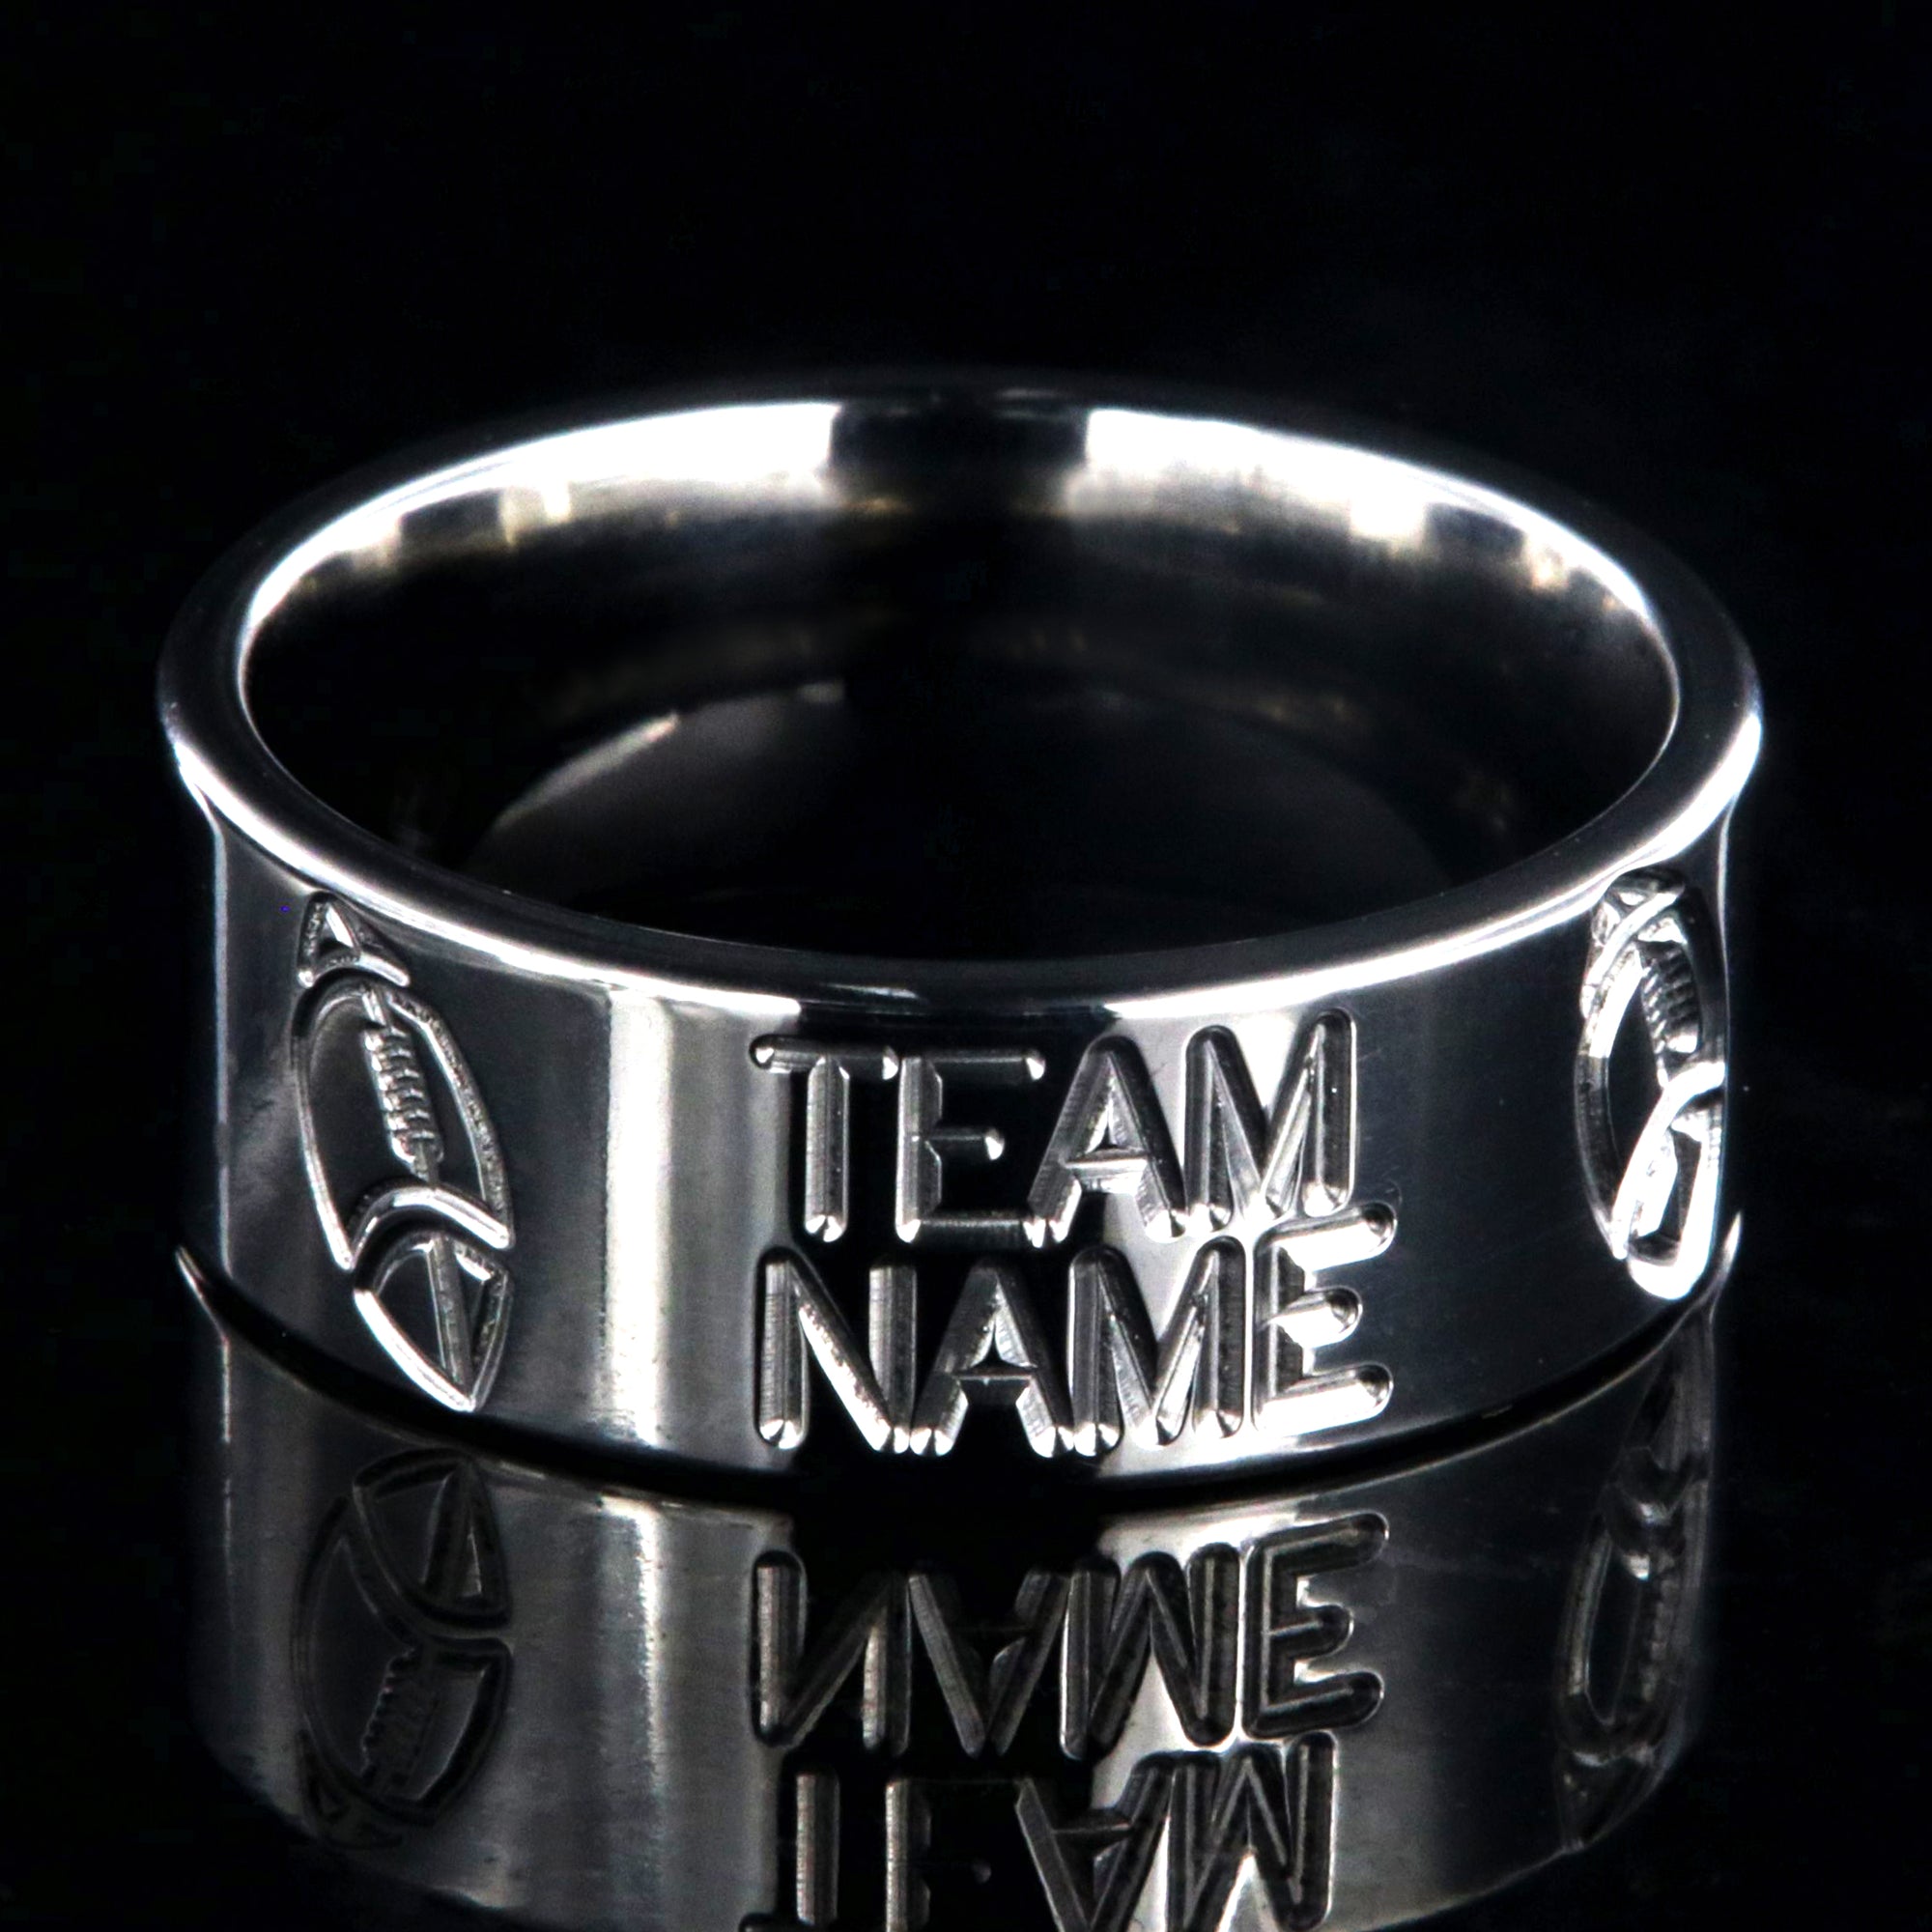 8mm wide titanium football ring with milled footballs and a custom team name